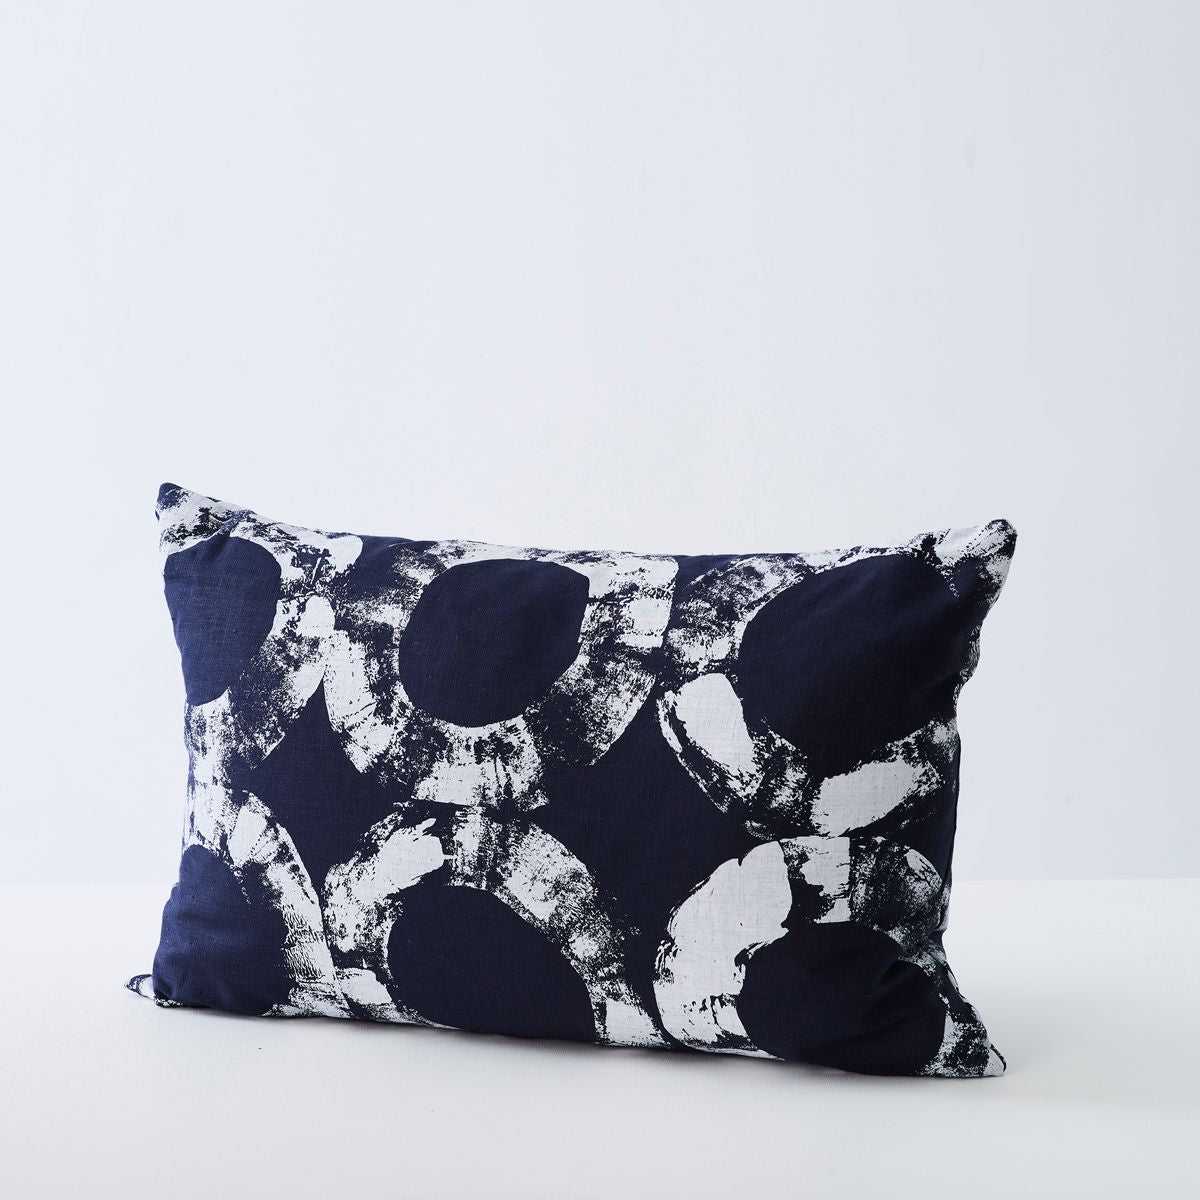 Handmade navy cushion with a circular pattern. Made in the UK.